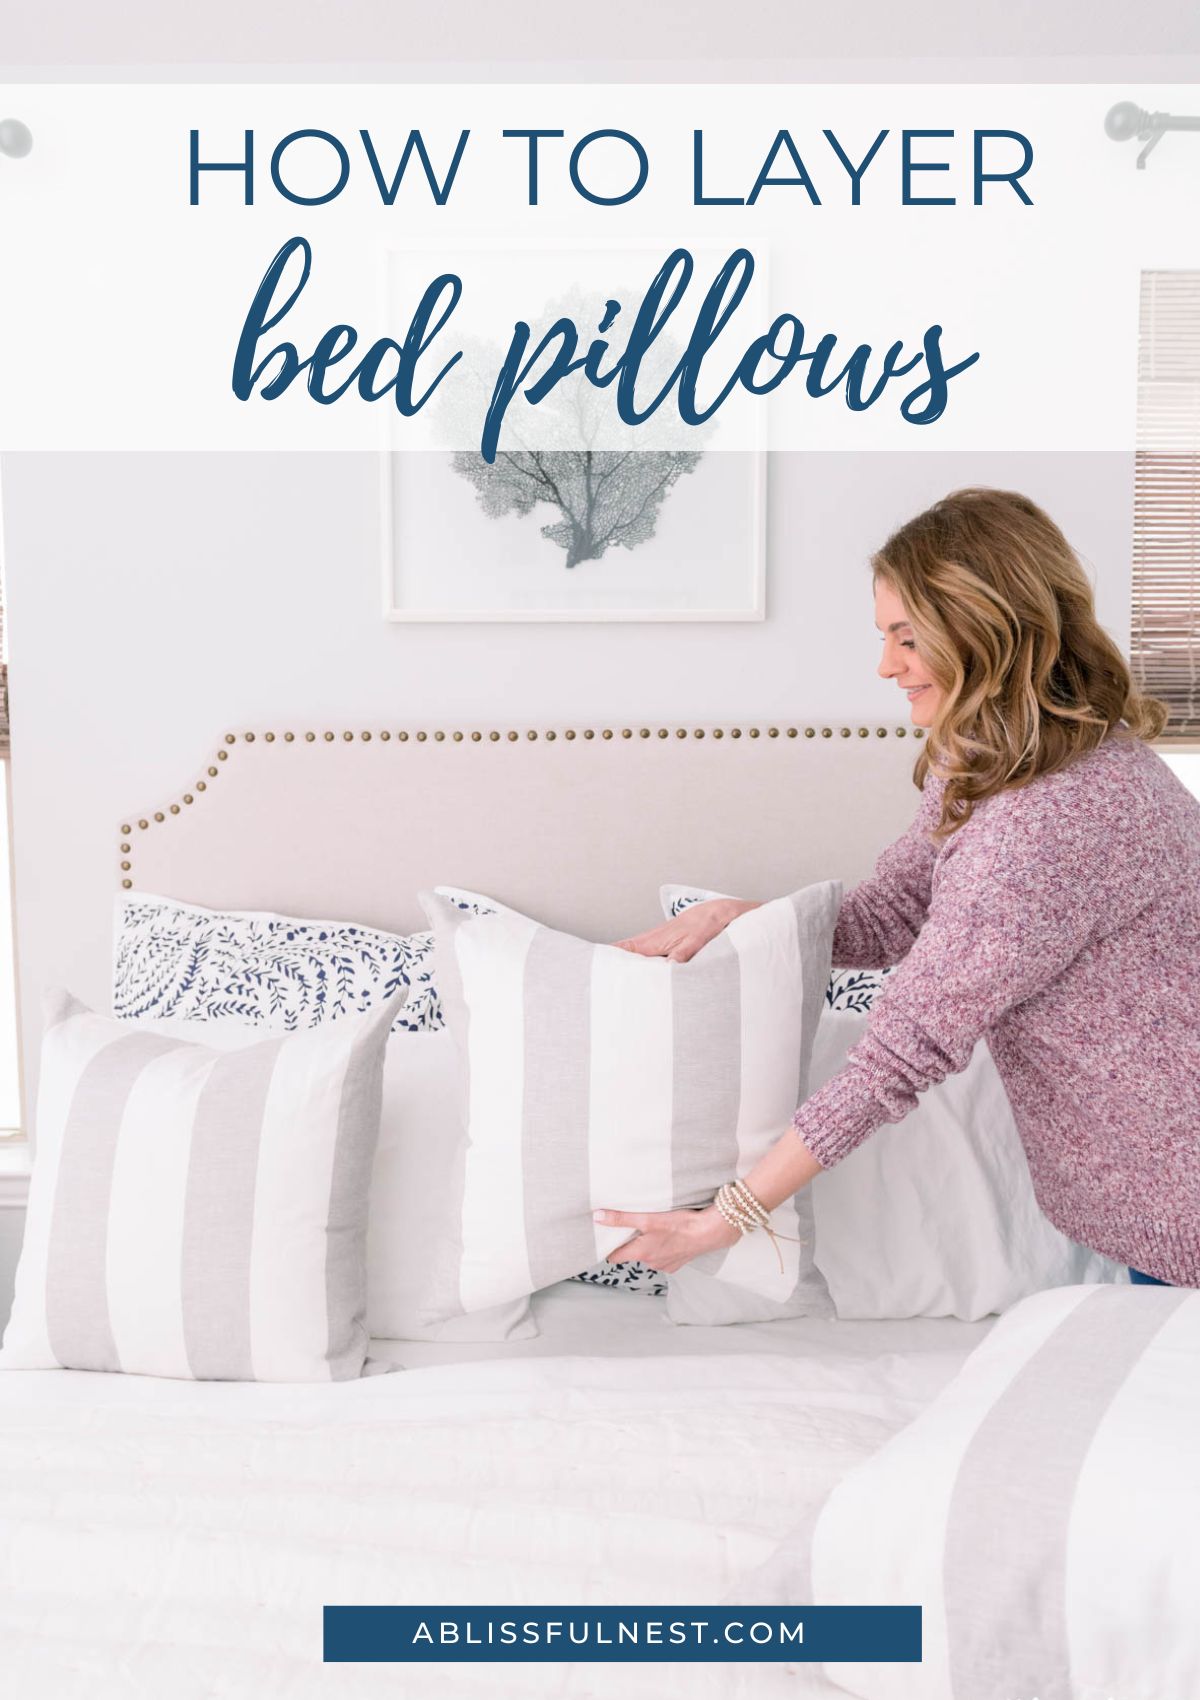 bed layering tips with accent pillows, sleeping pillows and euro pillows.